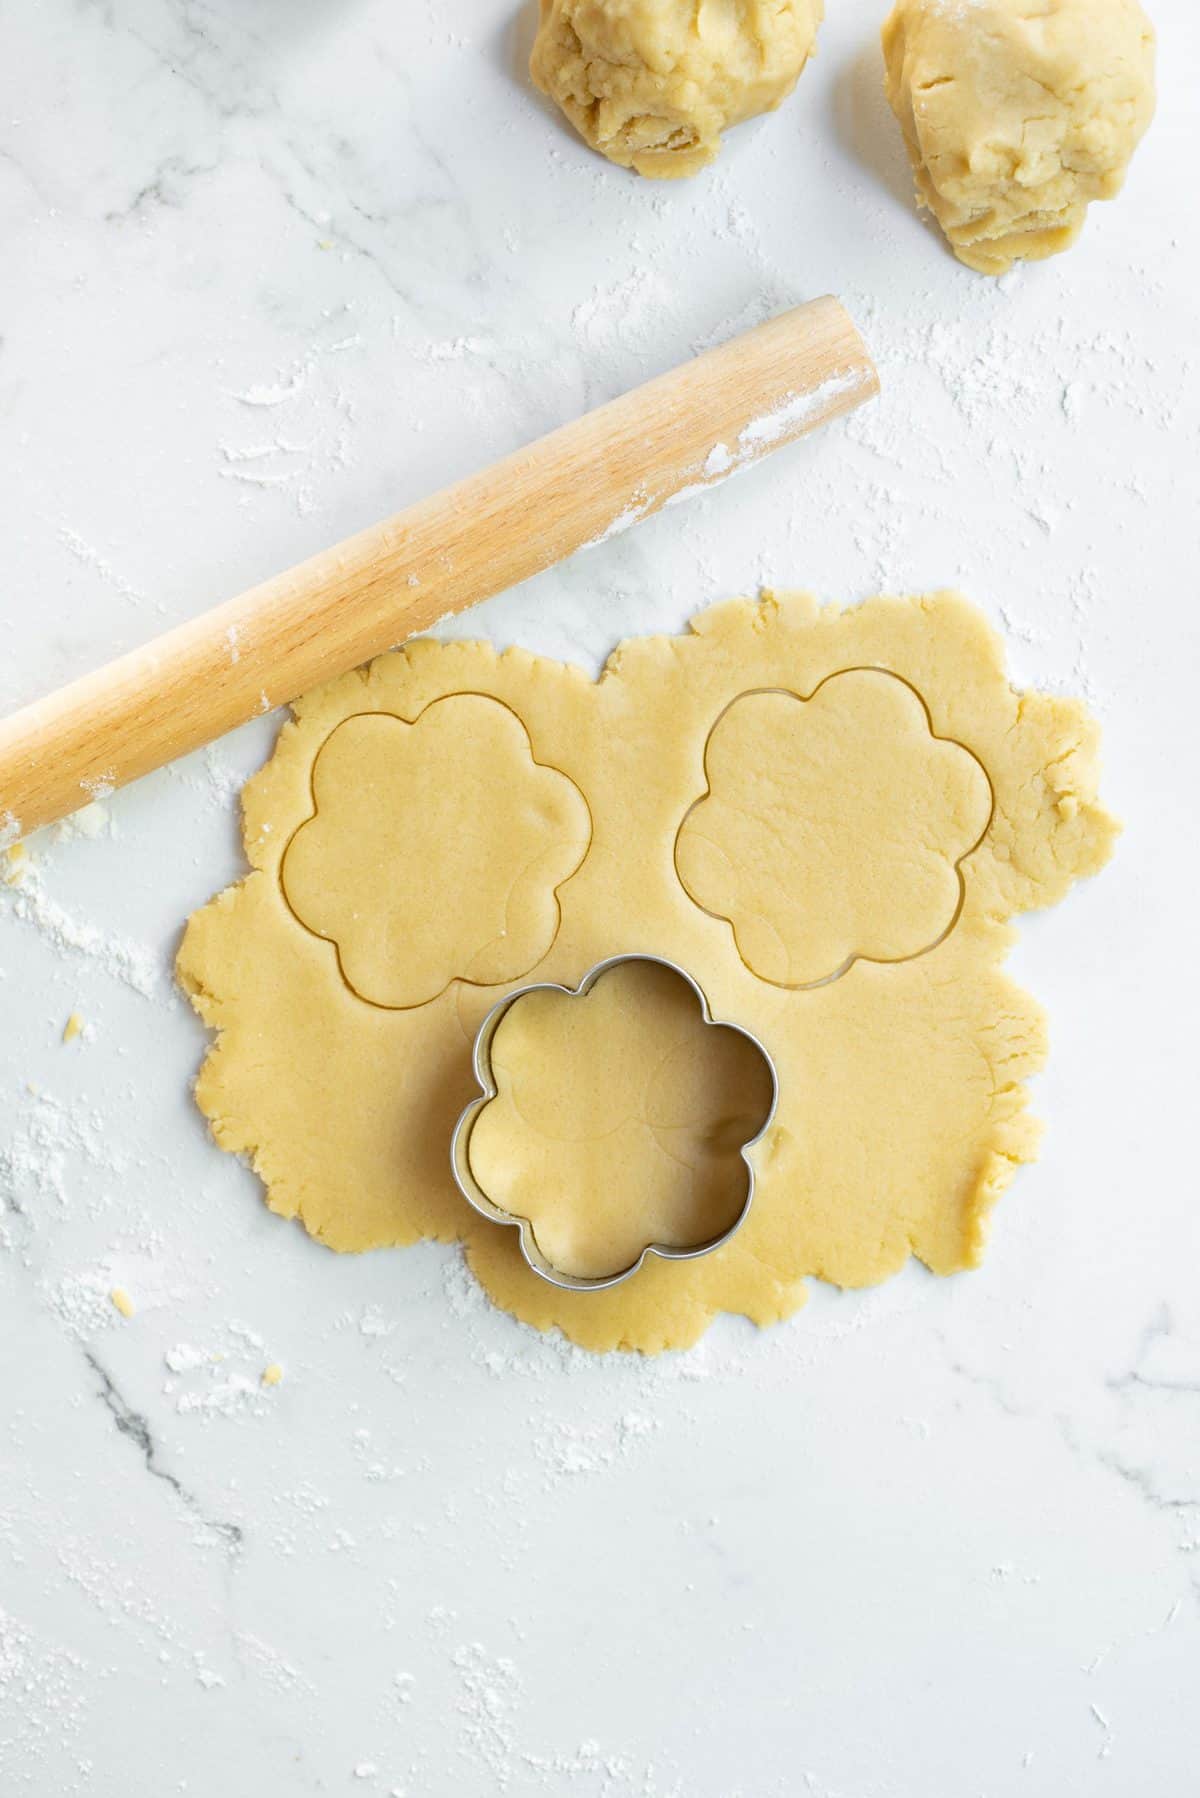 Flower shaped cookie cutter cutting out cookie dough.